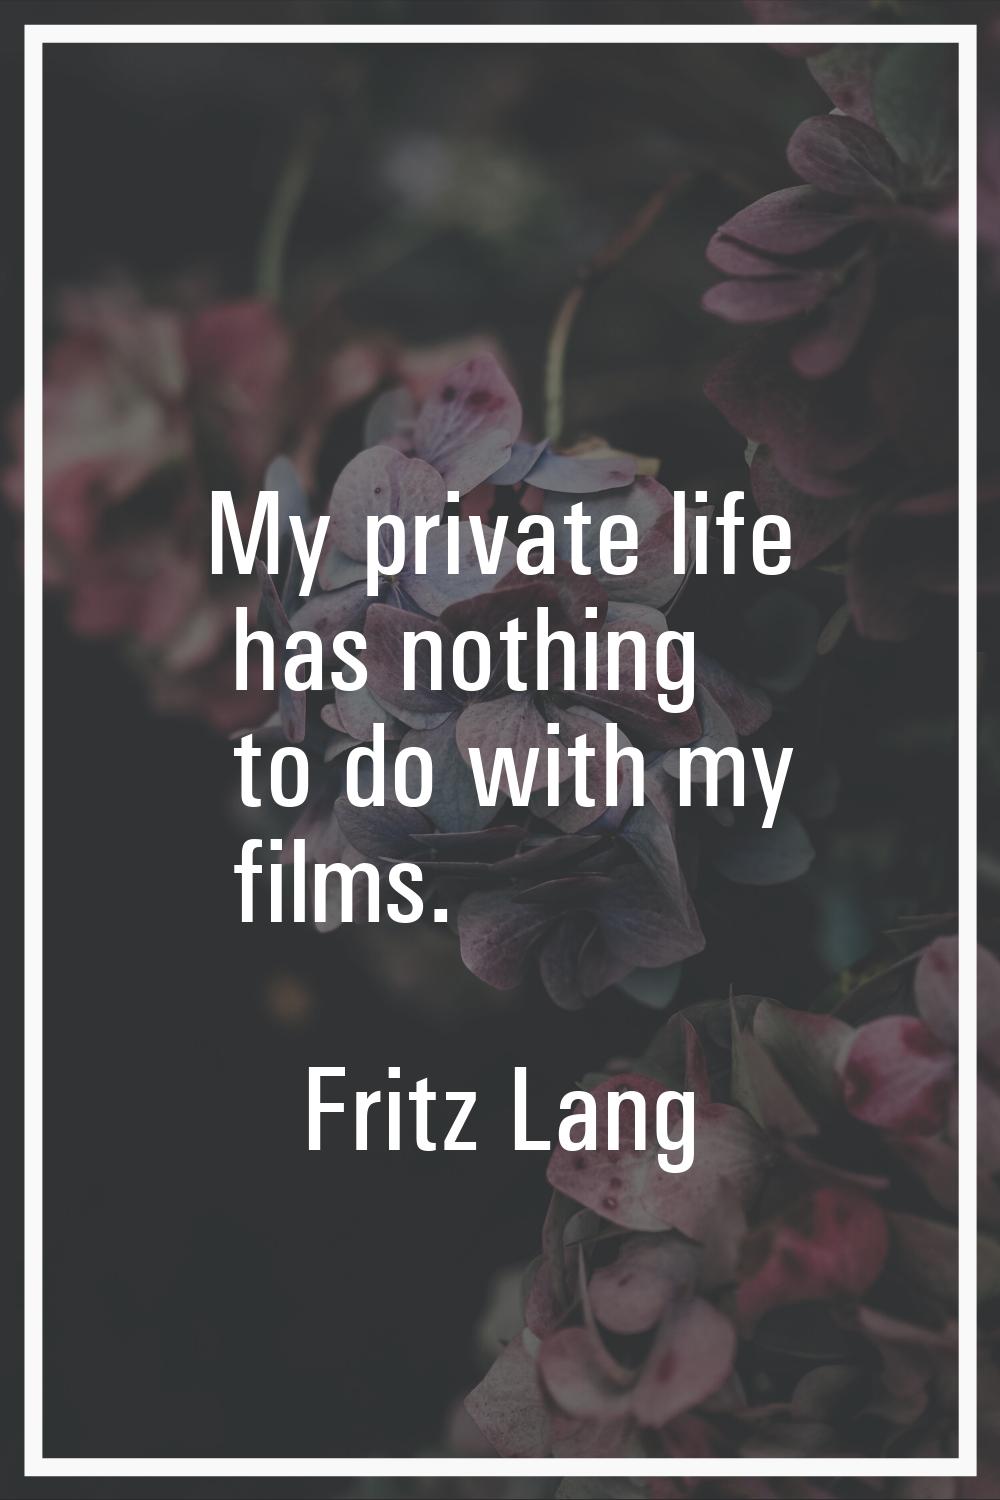 My private life has nothing to do with my films.